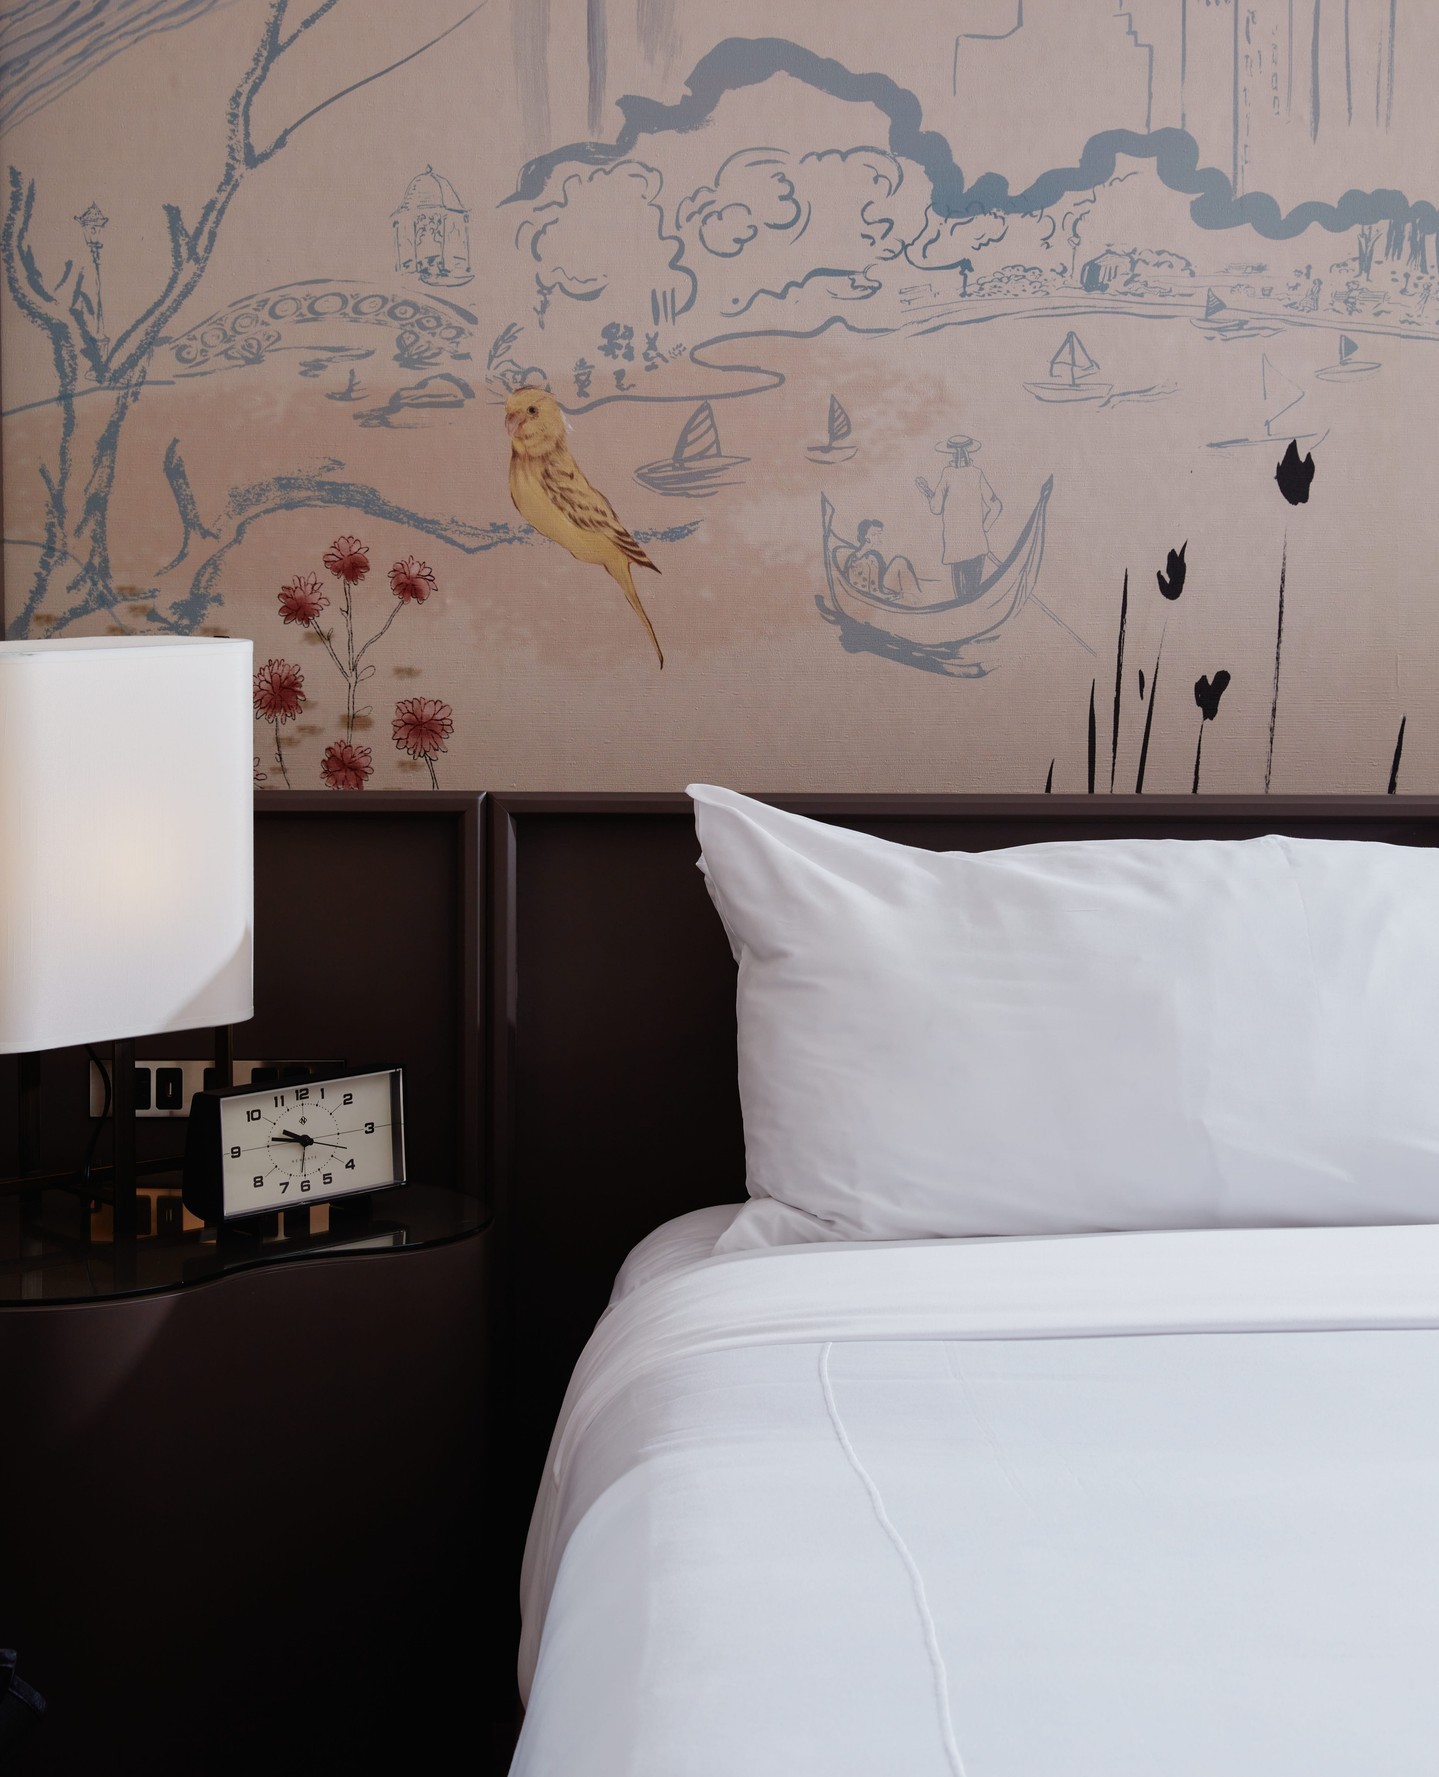 with in-room designs inspired by the magic of the city, you're bound to wake up on the right side of the bed